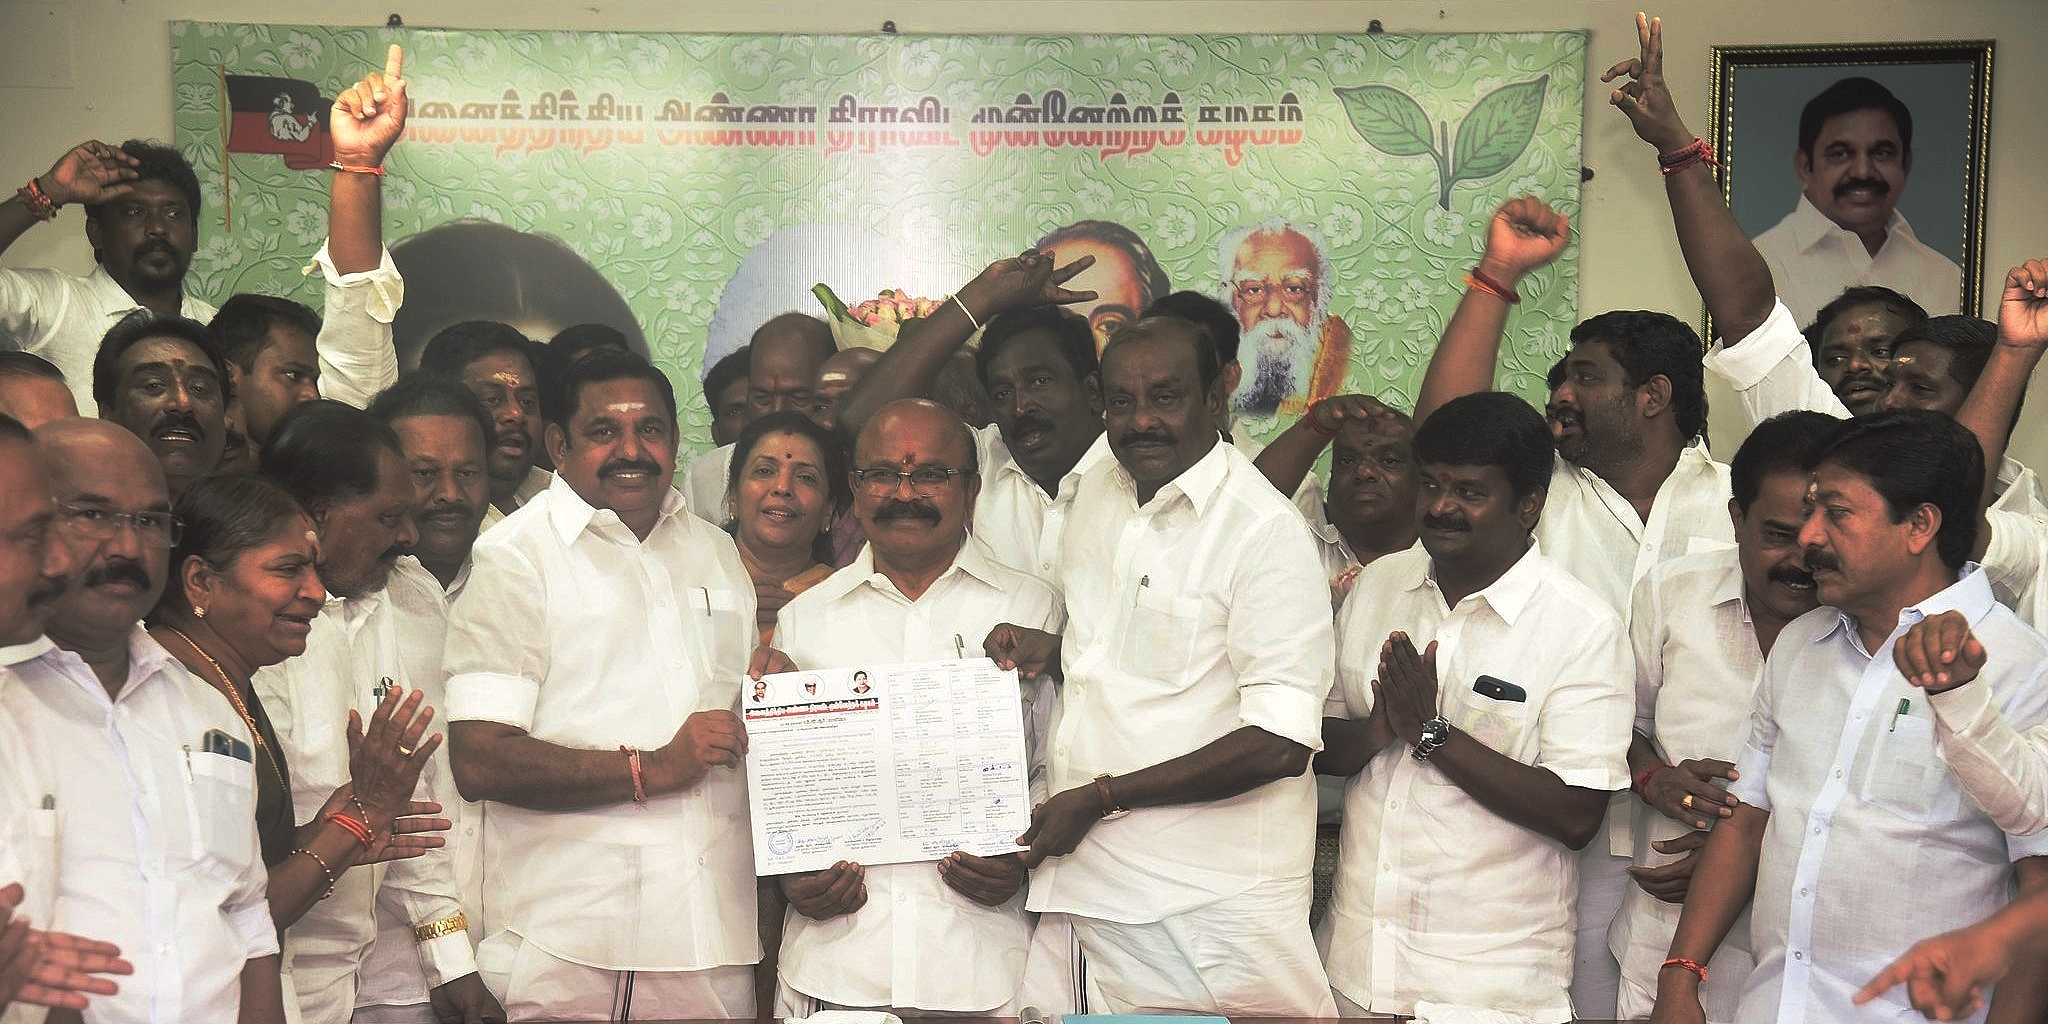 AIADMK election commissioners Pollachi V Jayaraman and Natham R Viswanathan hand over the winner's certificate in the general secretary elections to E Palaniswami in Chennai on Tuesday, 28 March. (Supplied)